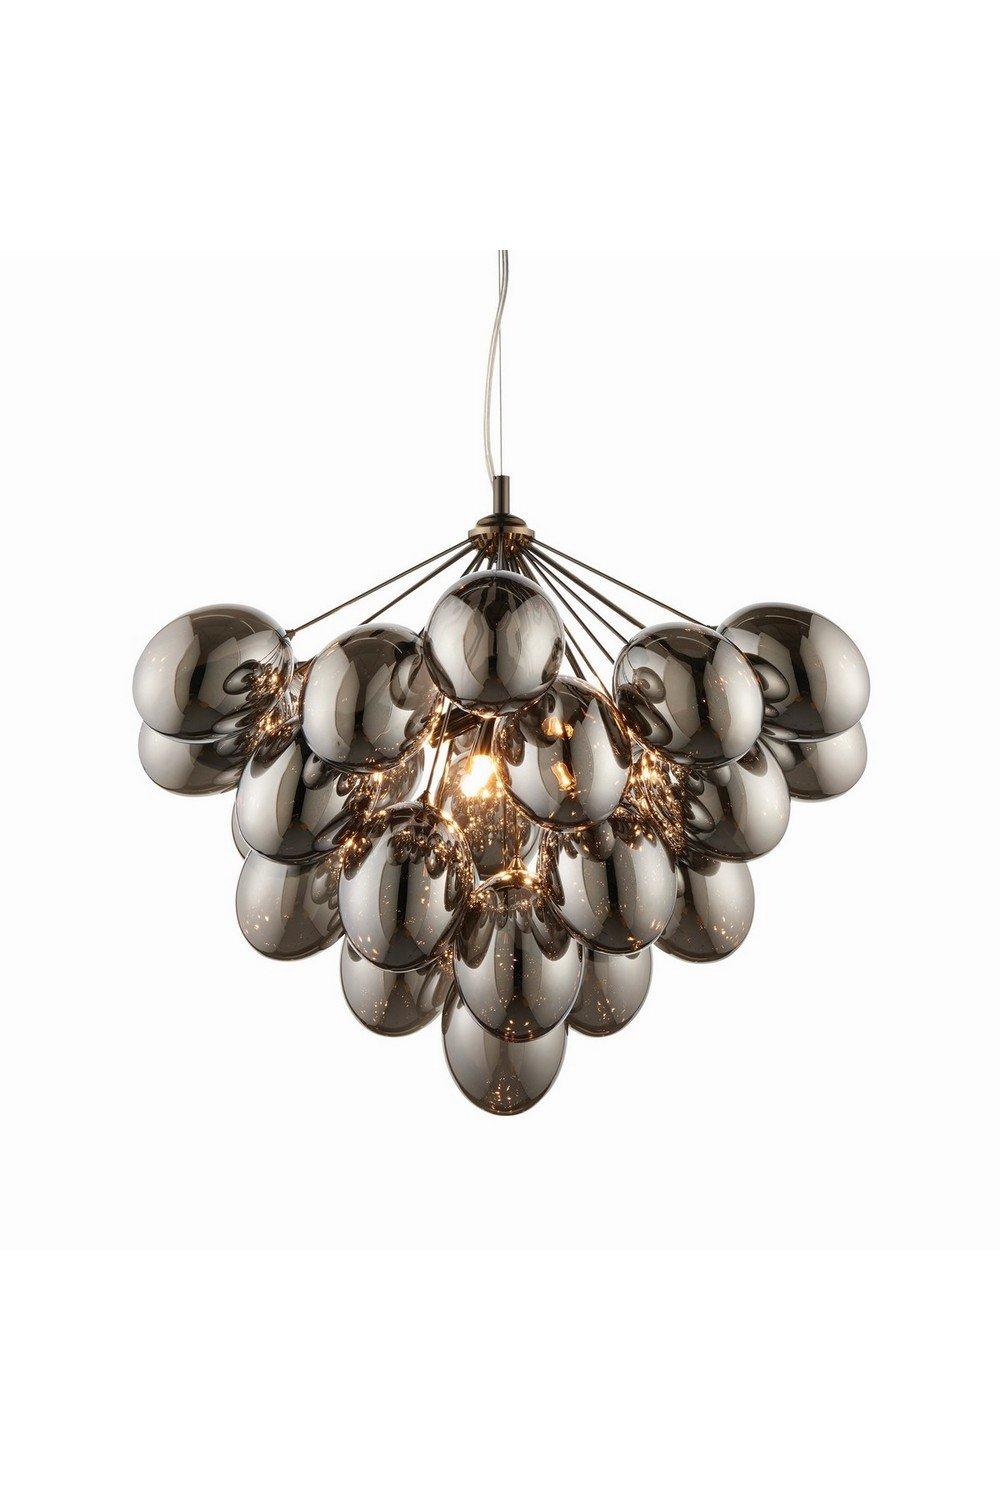 Infinity Pendant Black Chrome Effect Plate & Smokey Mirror Effect Tinted Glass 6 Light Dimmable IP20